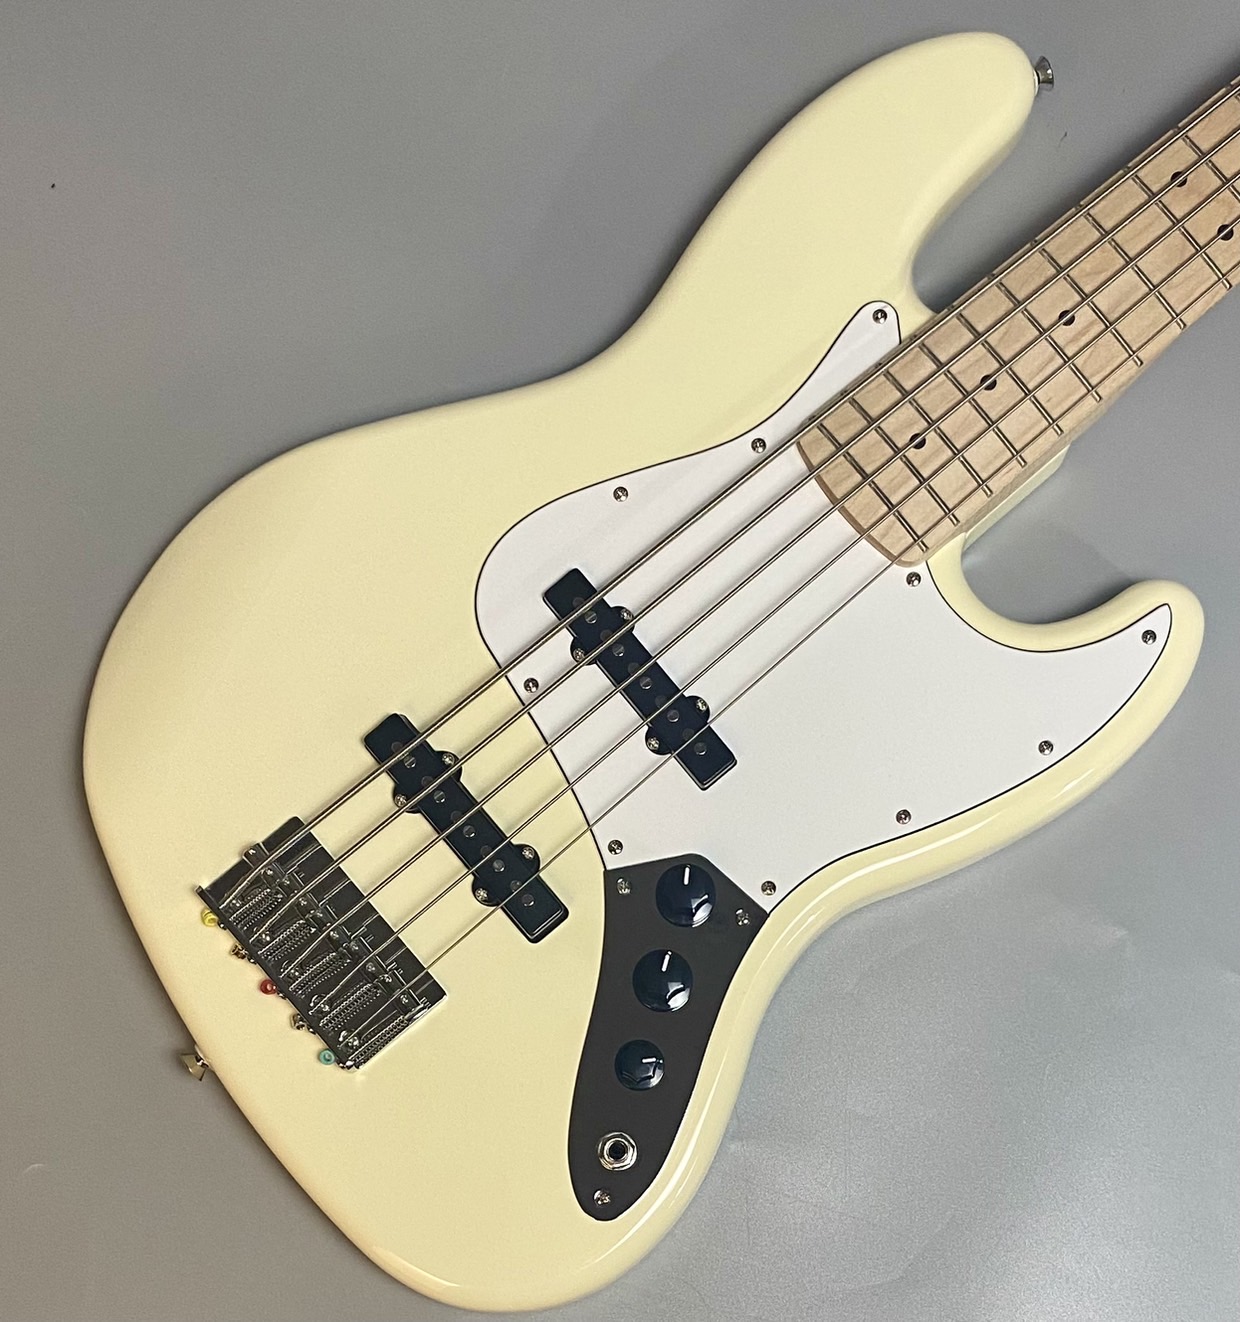 Squier by Fender Affinity Series Jazz Bass V (Olympic White/Maple)